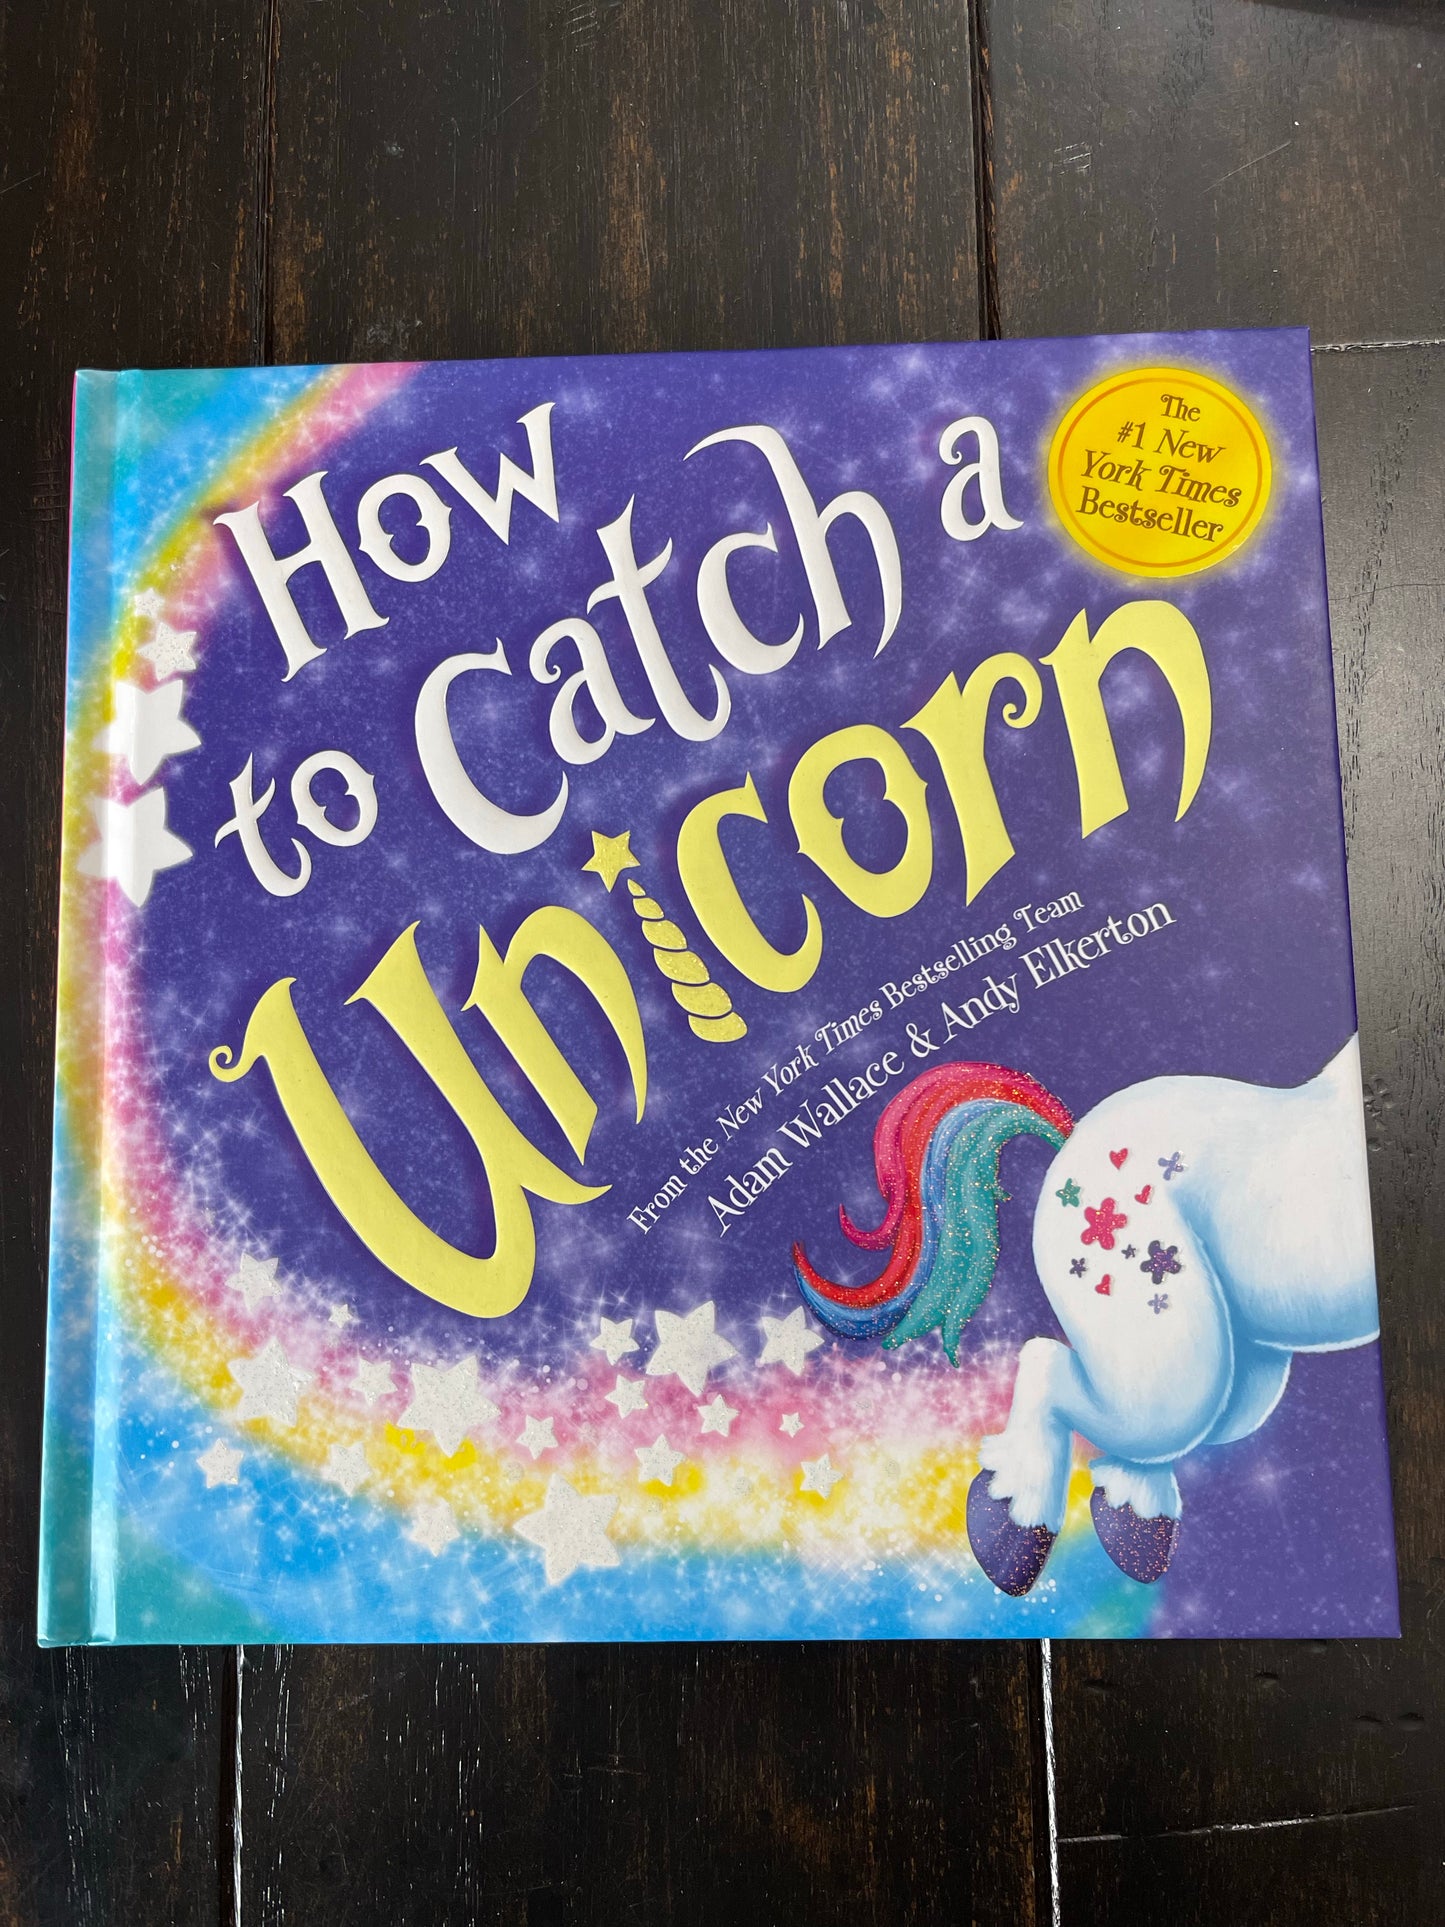 BOOK: How to Catch...